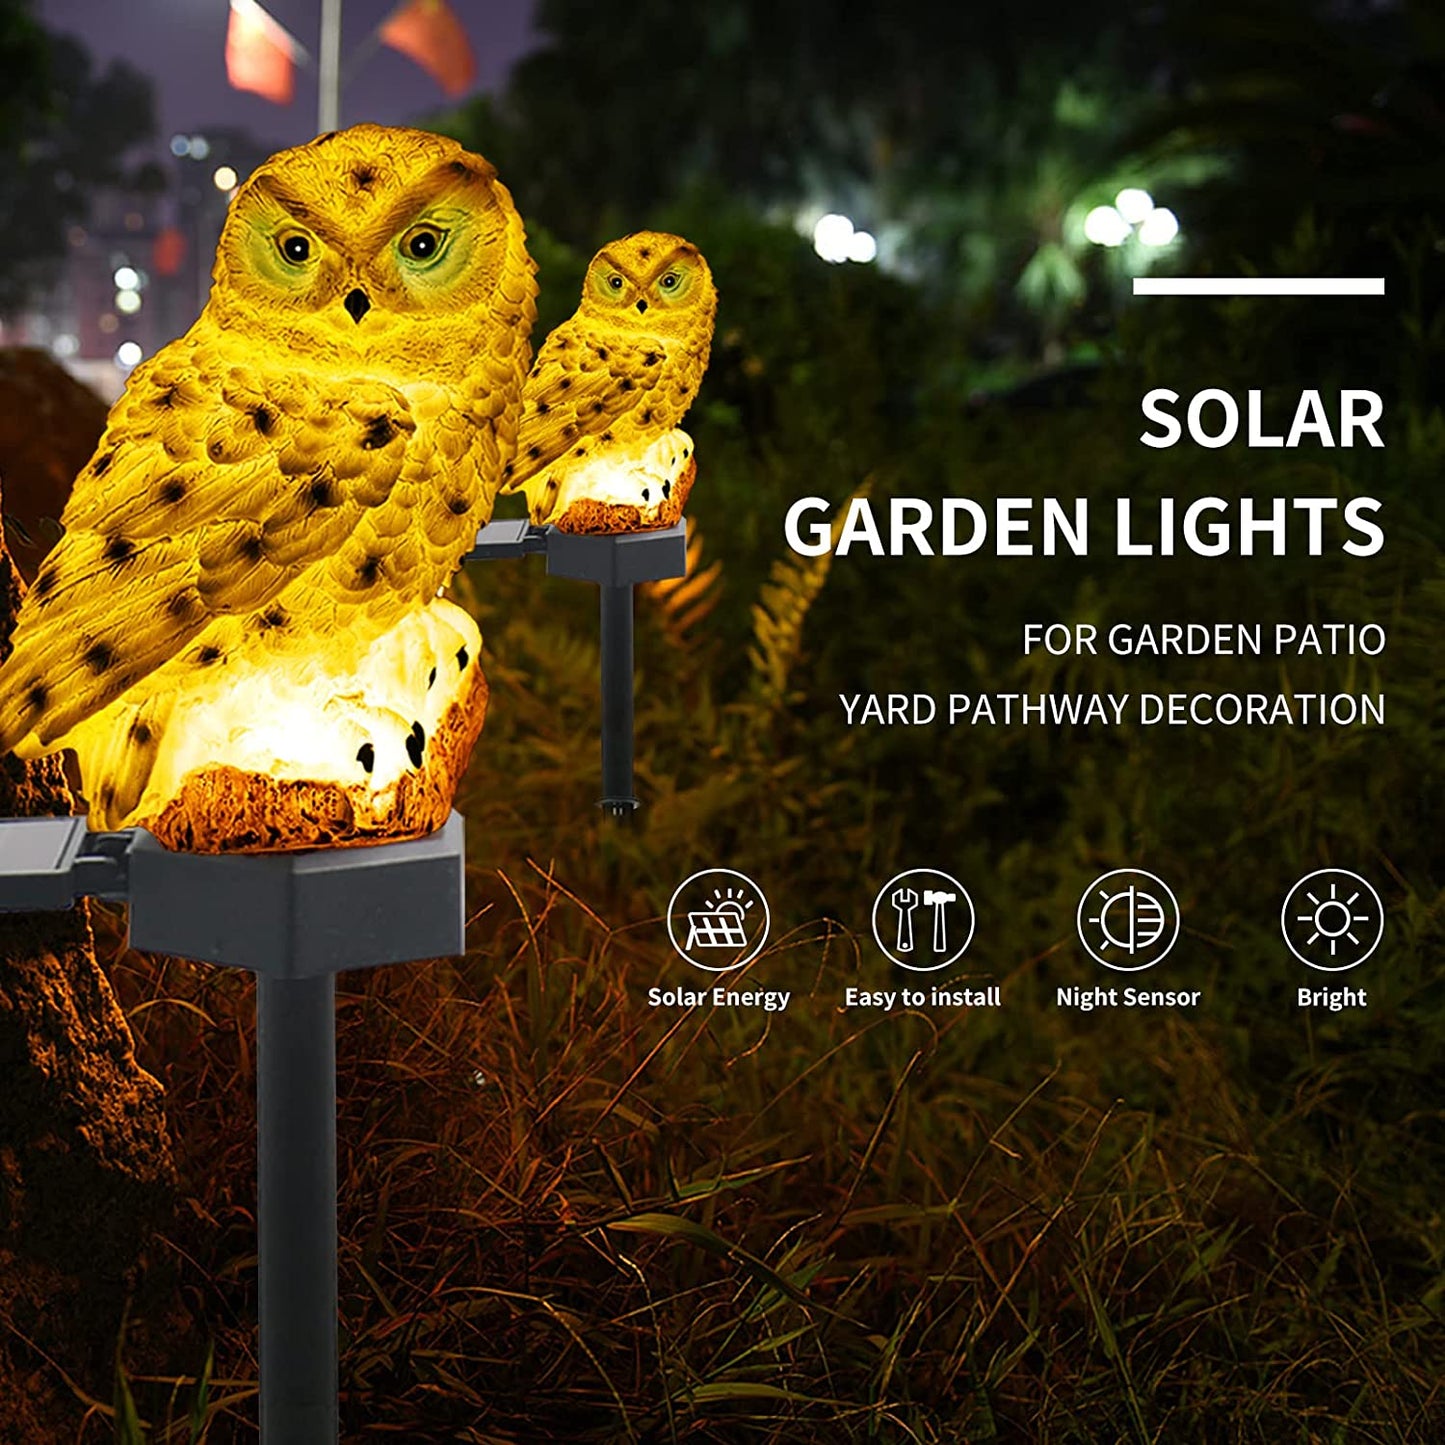  2 Pack Owl Solar Lights Outdoor Garden,IP67 Waterproof Warm White LED Solar Stake Lights for Garden, Patio, Yard, Lawn, Walkway Decoration(White)